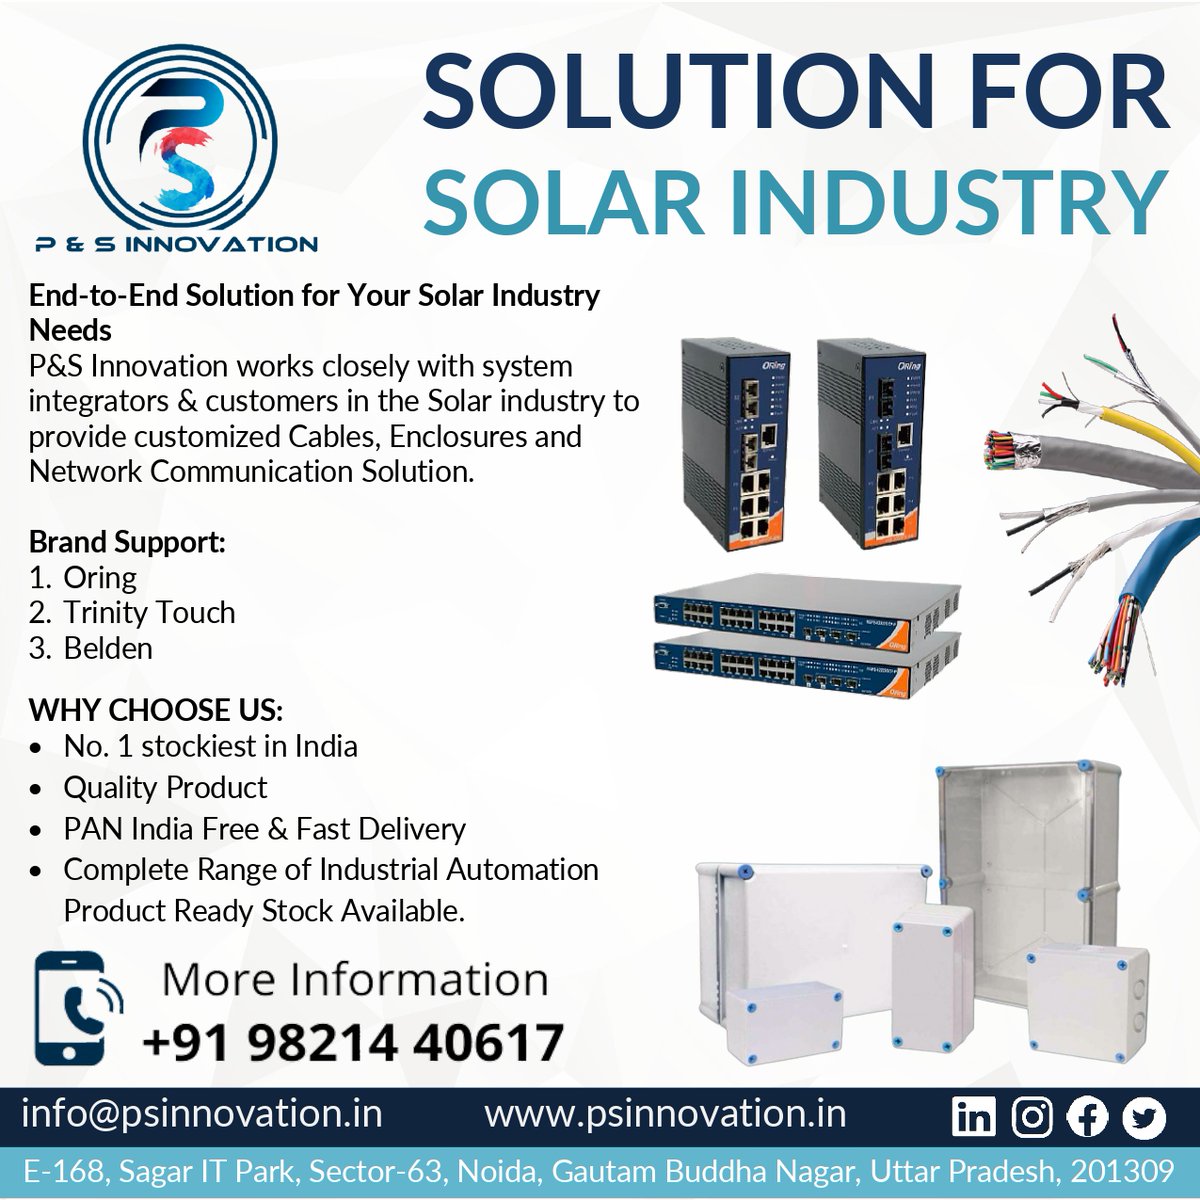 Get an end to end solution for your solar industry needs.

For More Information WhatsApp us on
wa.me/919821440617

#pandsinnovation #automationsolutions #industrialengineering #products #network #solarindustry #solarsolution #oring #trinitytouch #belden #cables